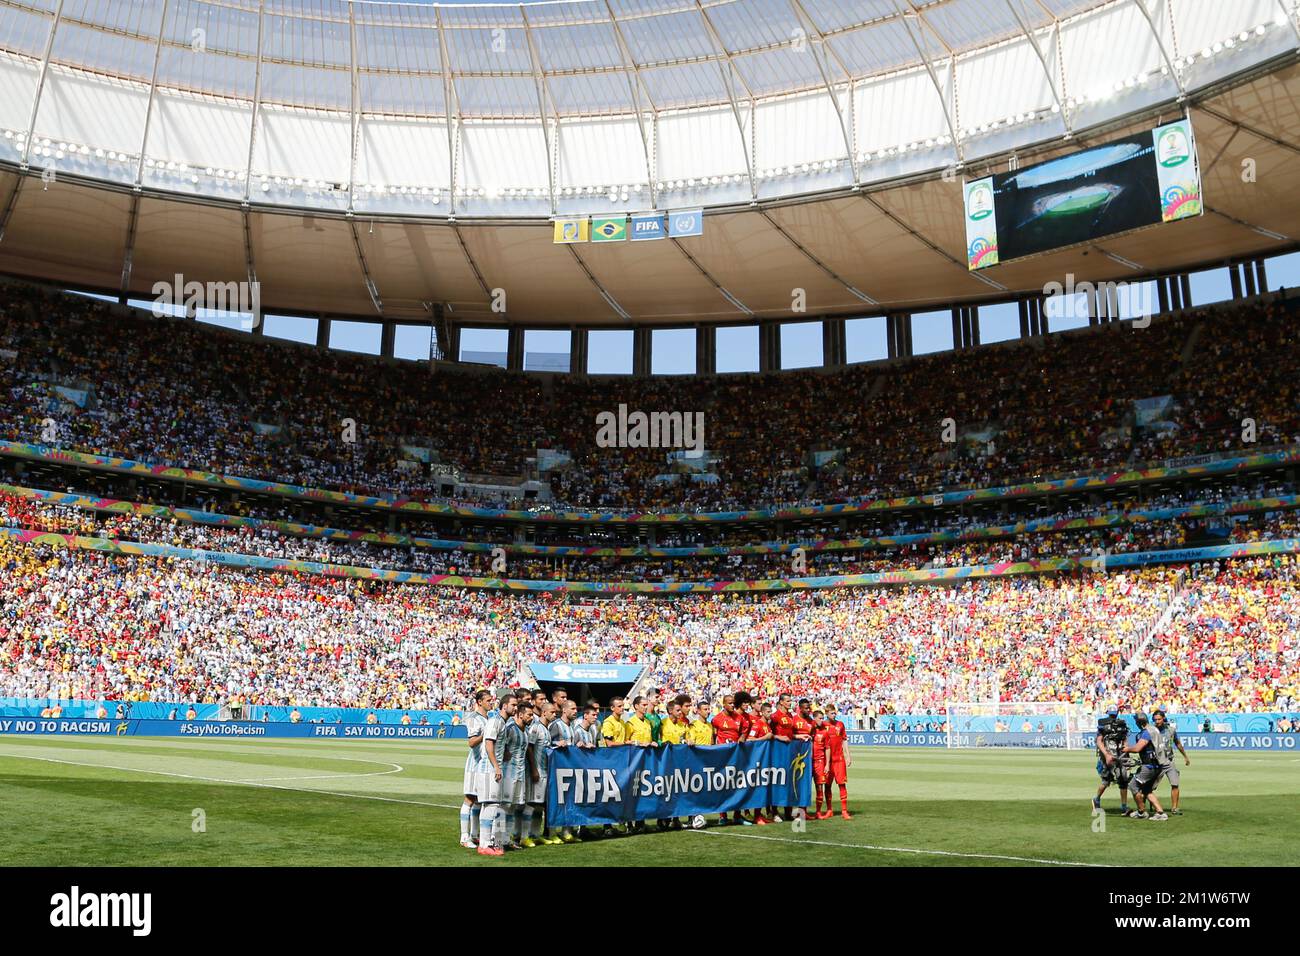 Players pose with the Fifa 'Say no to racism' banner at the beginning of the quarter final match between Belgian national soccer team Red Devils and Argentina, in Estadio Nacional Mane Garrincha, in Brasilia, Brazil, during the 2014 FIFA World Cup, Saturday 05 July 2014. BELGA PHOTO BRUNO FAHY Stock Photo